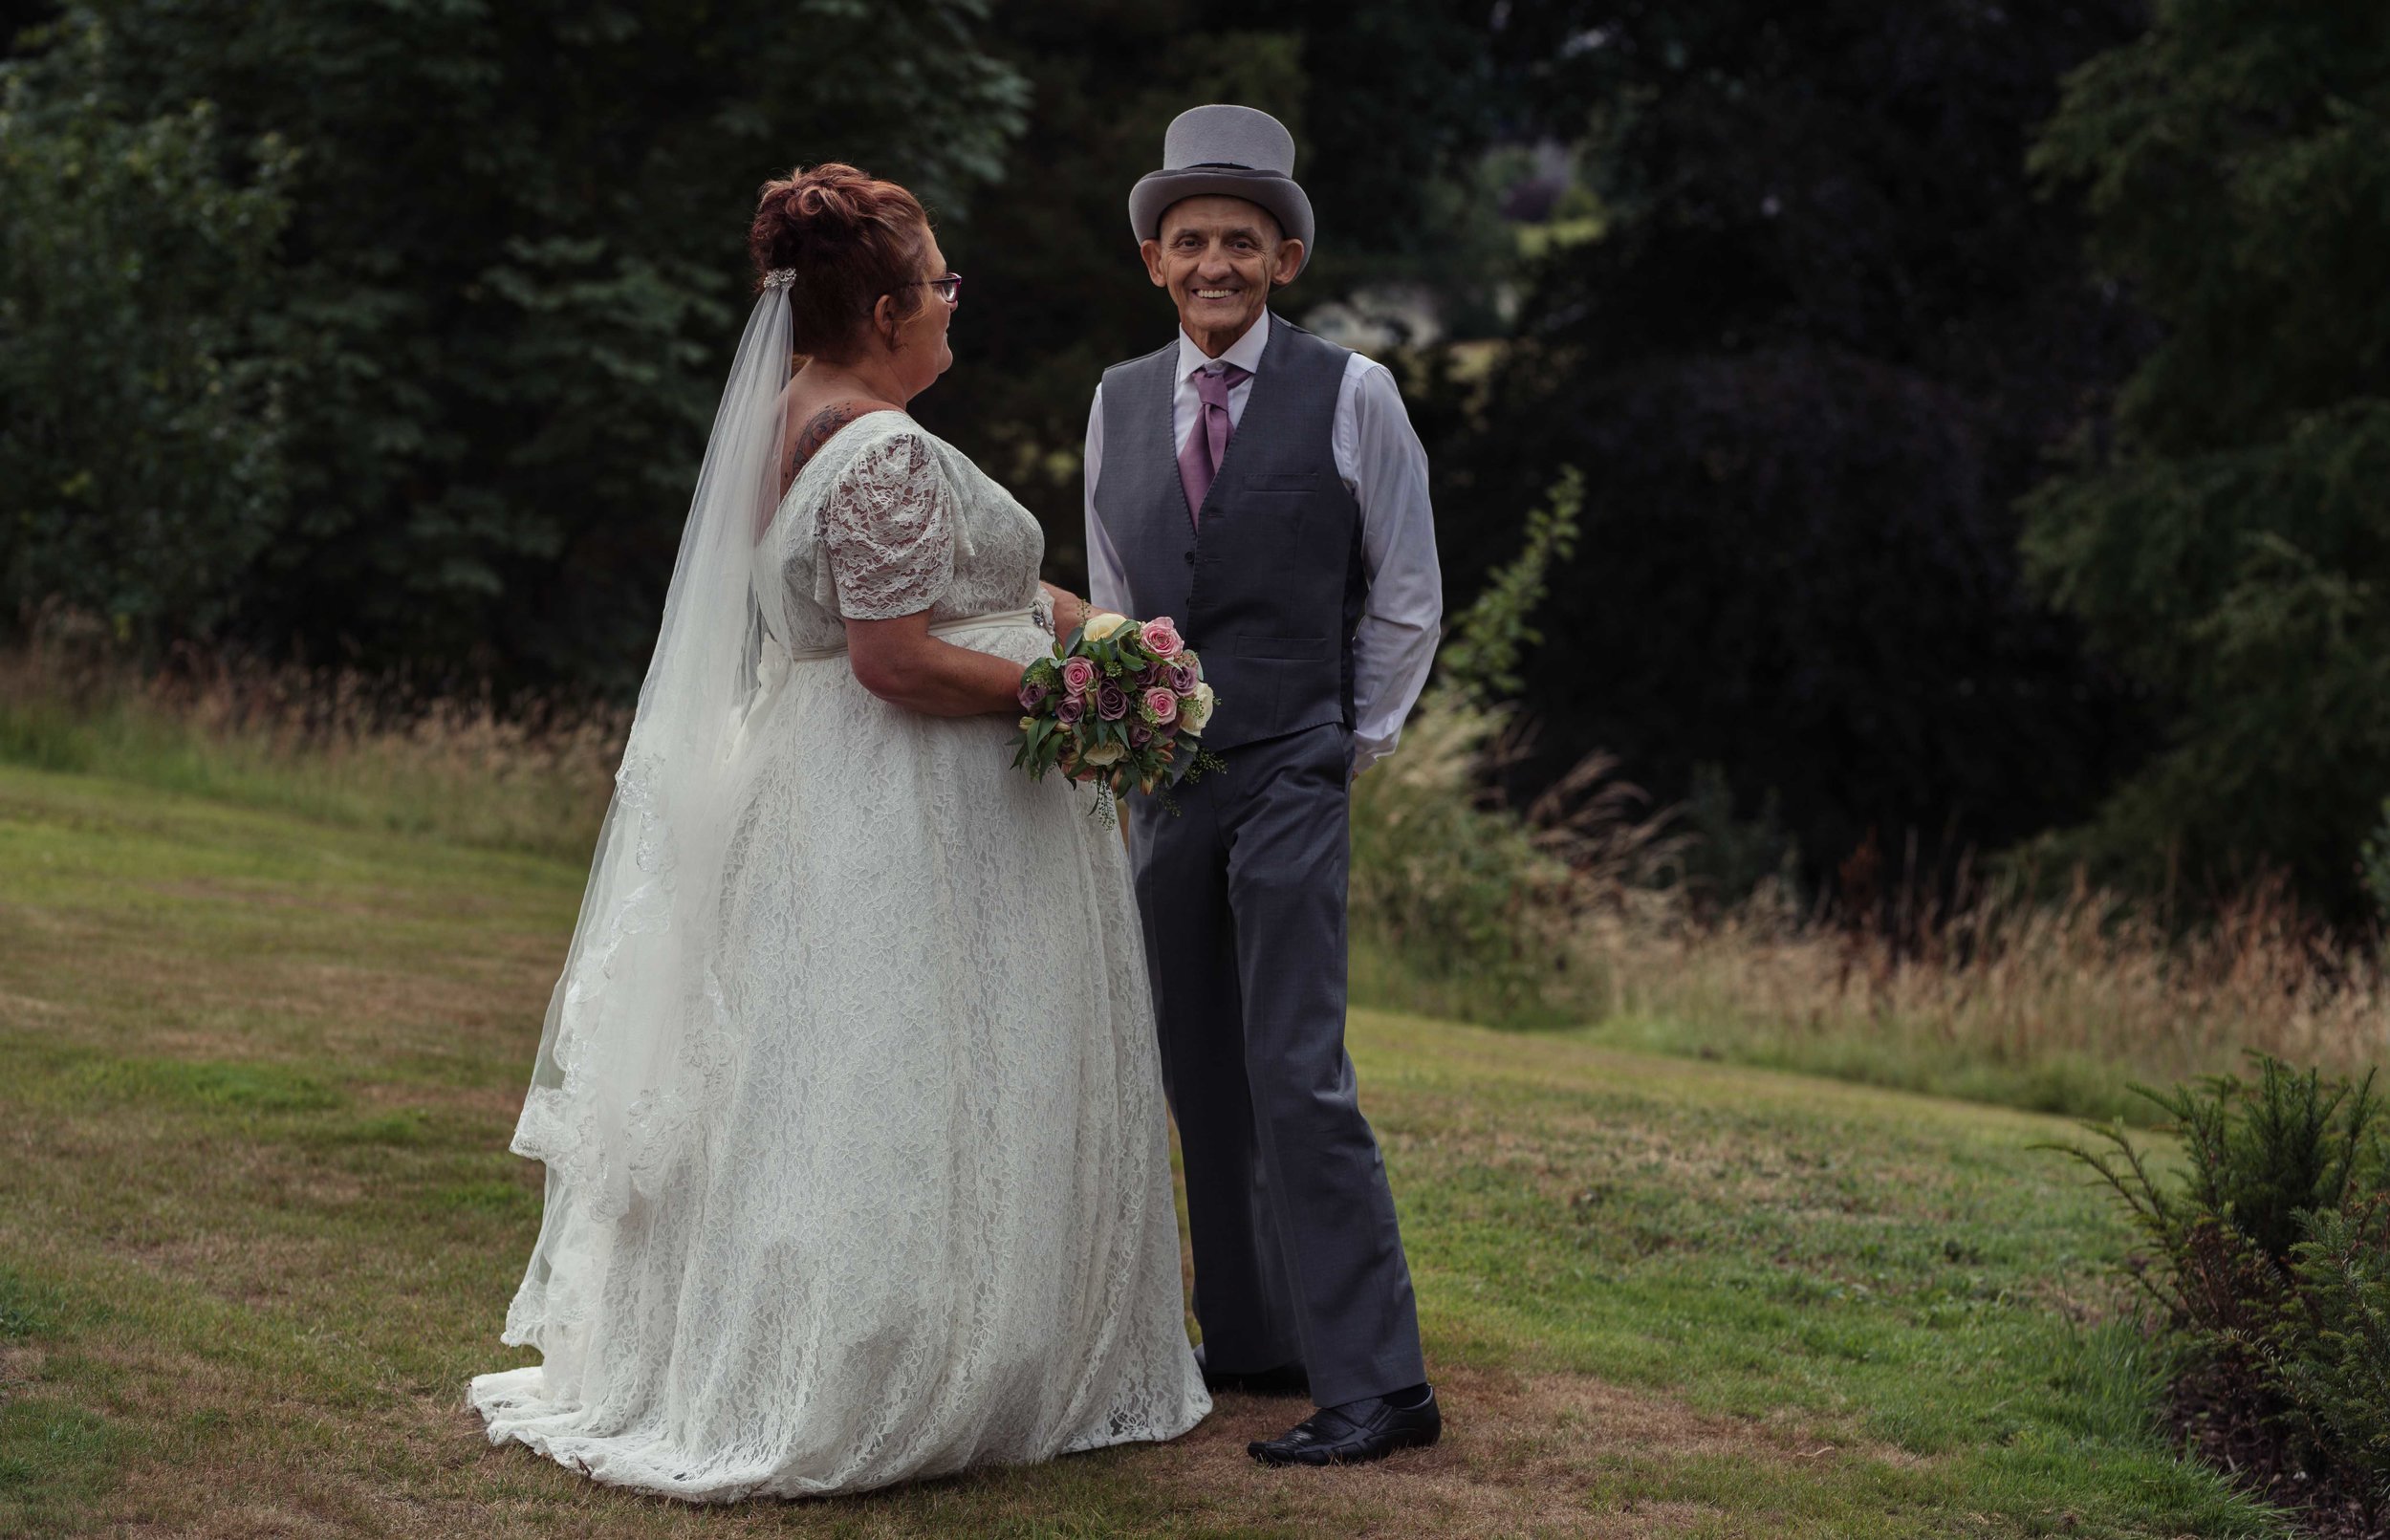 The groom giggles towards the camera as they stand for their Cumbria wedding photography